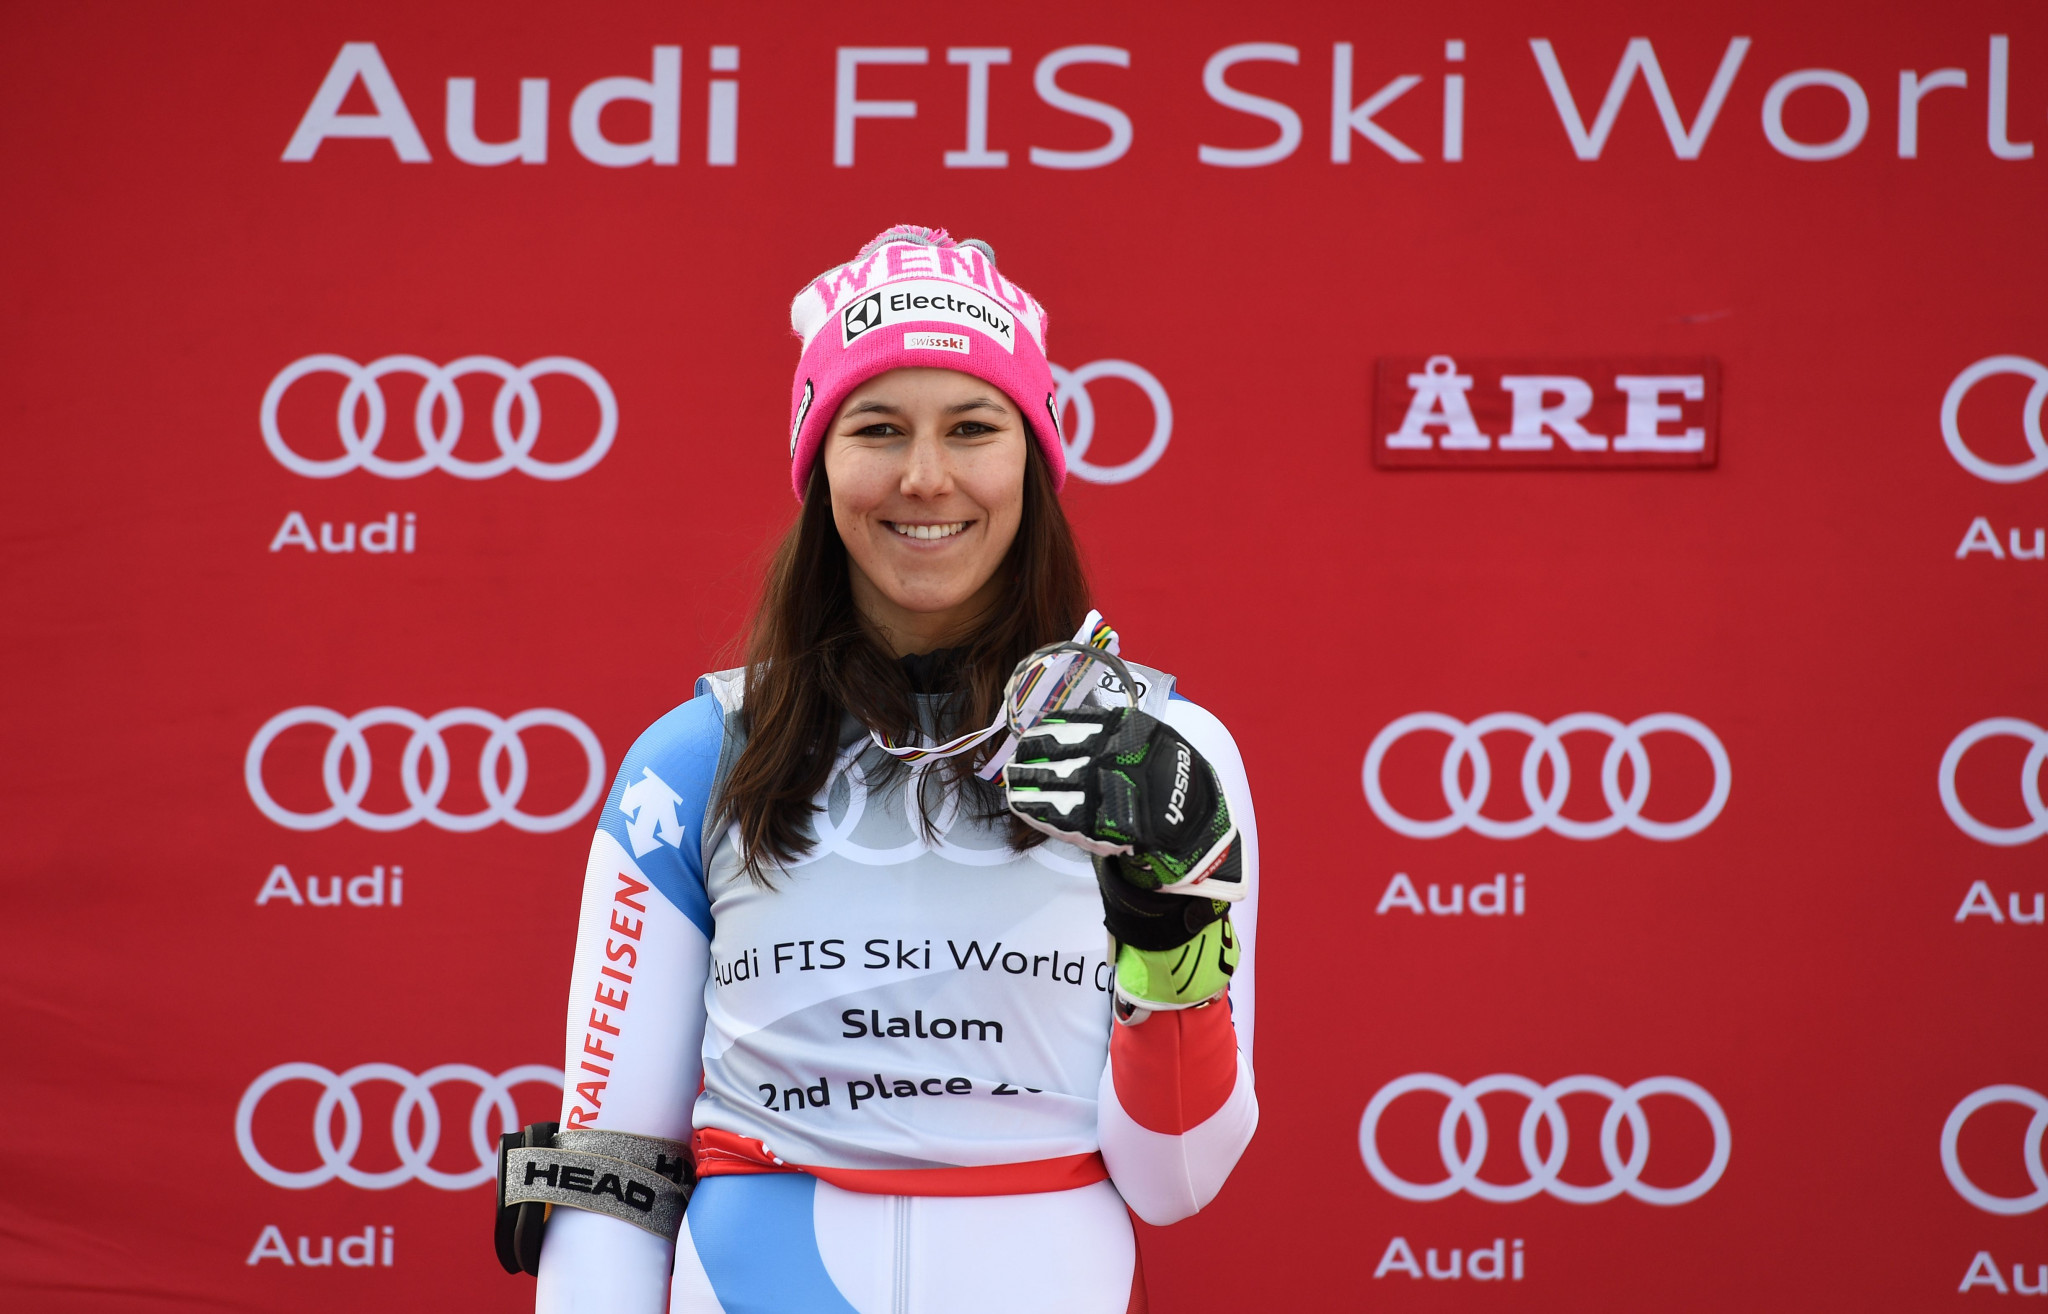 Alpine skier Wendy Holdener is one of the athletes involved ©Getty Images